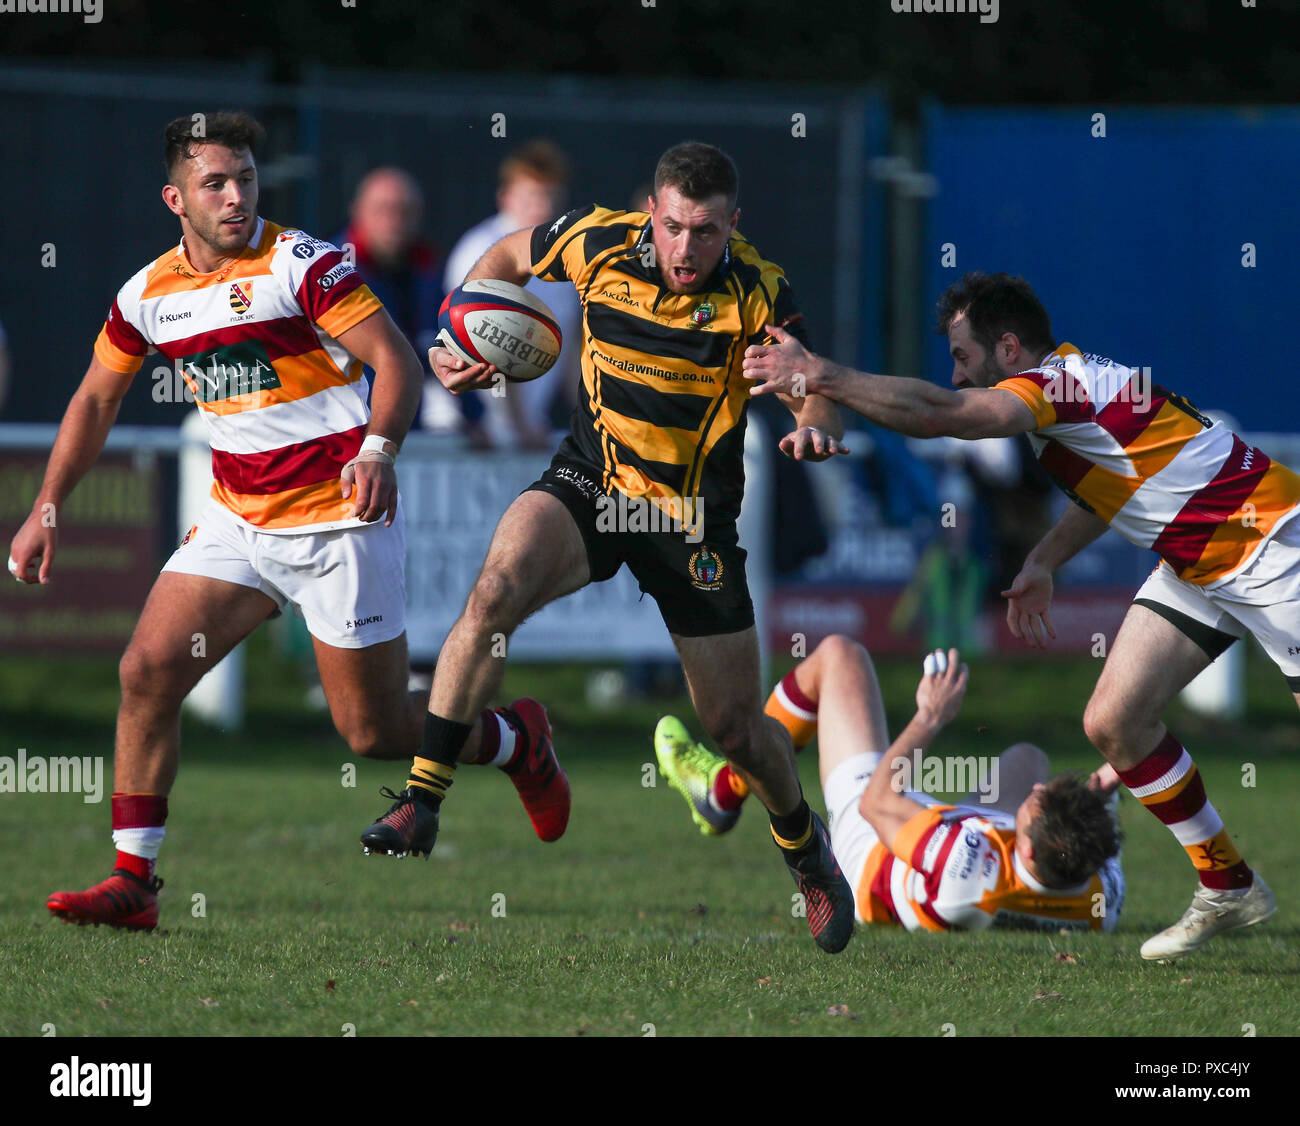 20.10.2018 Hinckley, Leicester, England. Rugby Union, Hinckley rfc v Fylde rfc.  Mitch Lamb makes a break for Hinckley during the RFU National League 2 North (NL2N) game played at the Leicester  Road Stadium.    © Phil Hutchinson / Alamy Live News Stock Photo